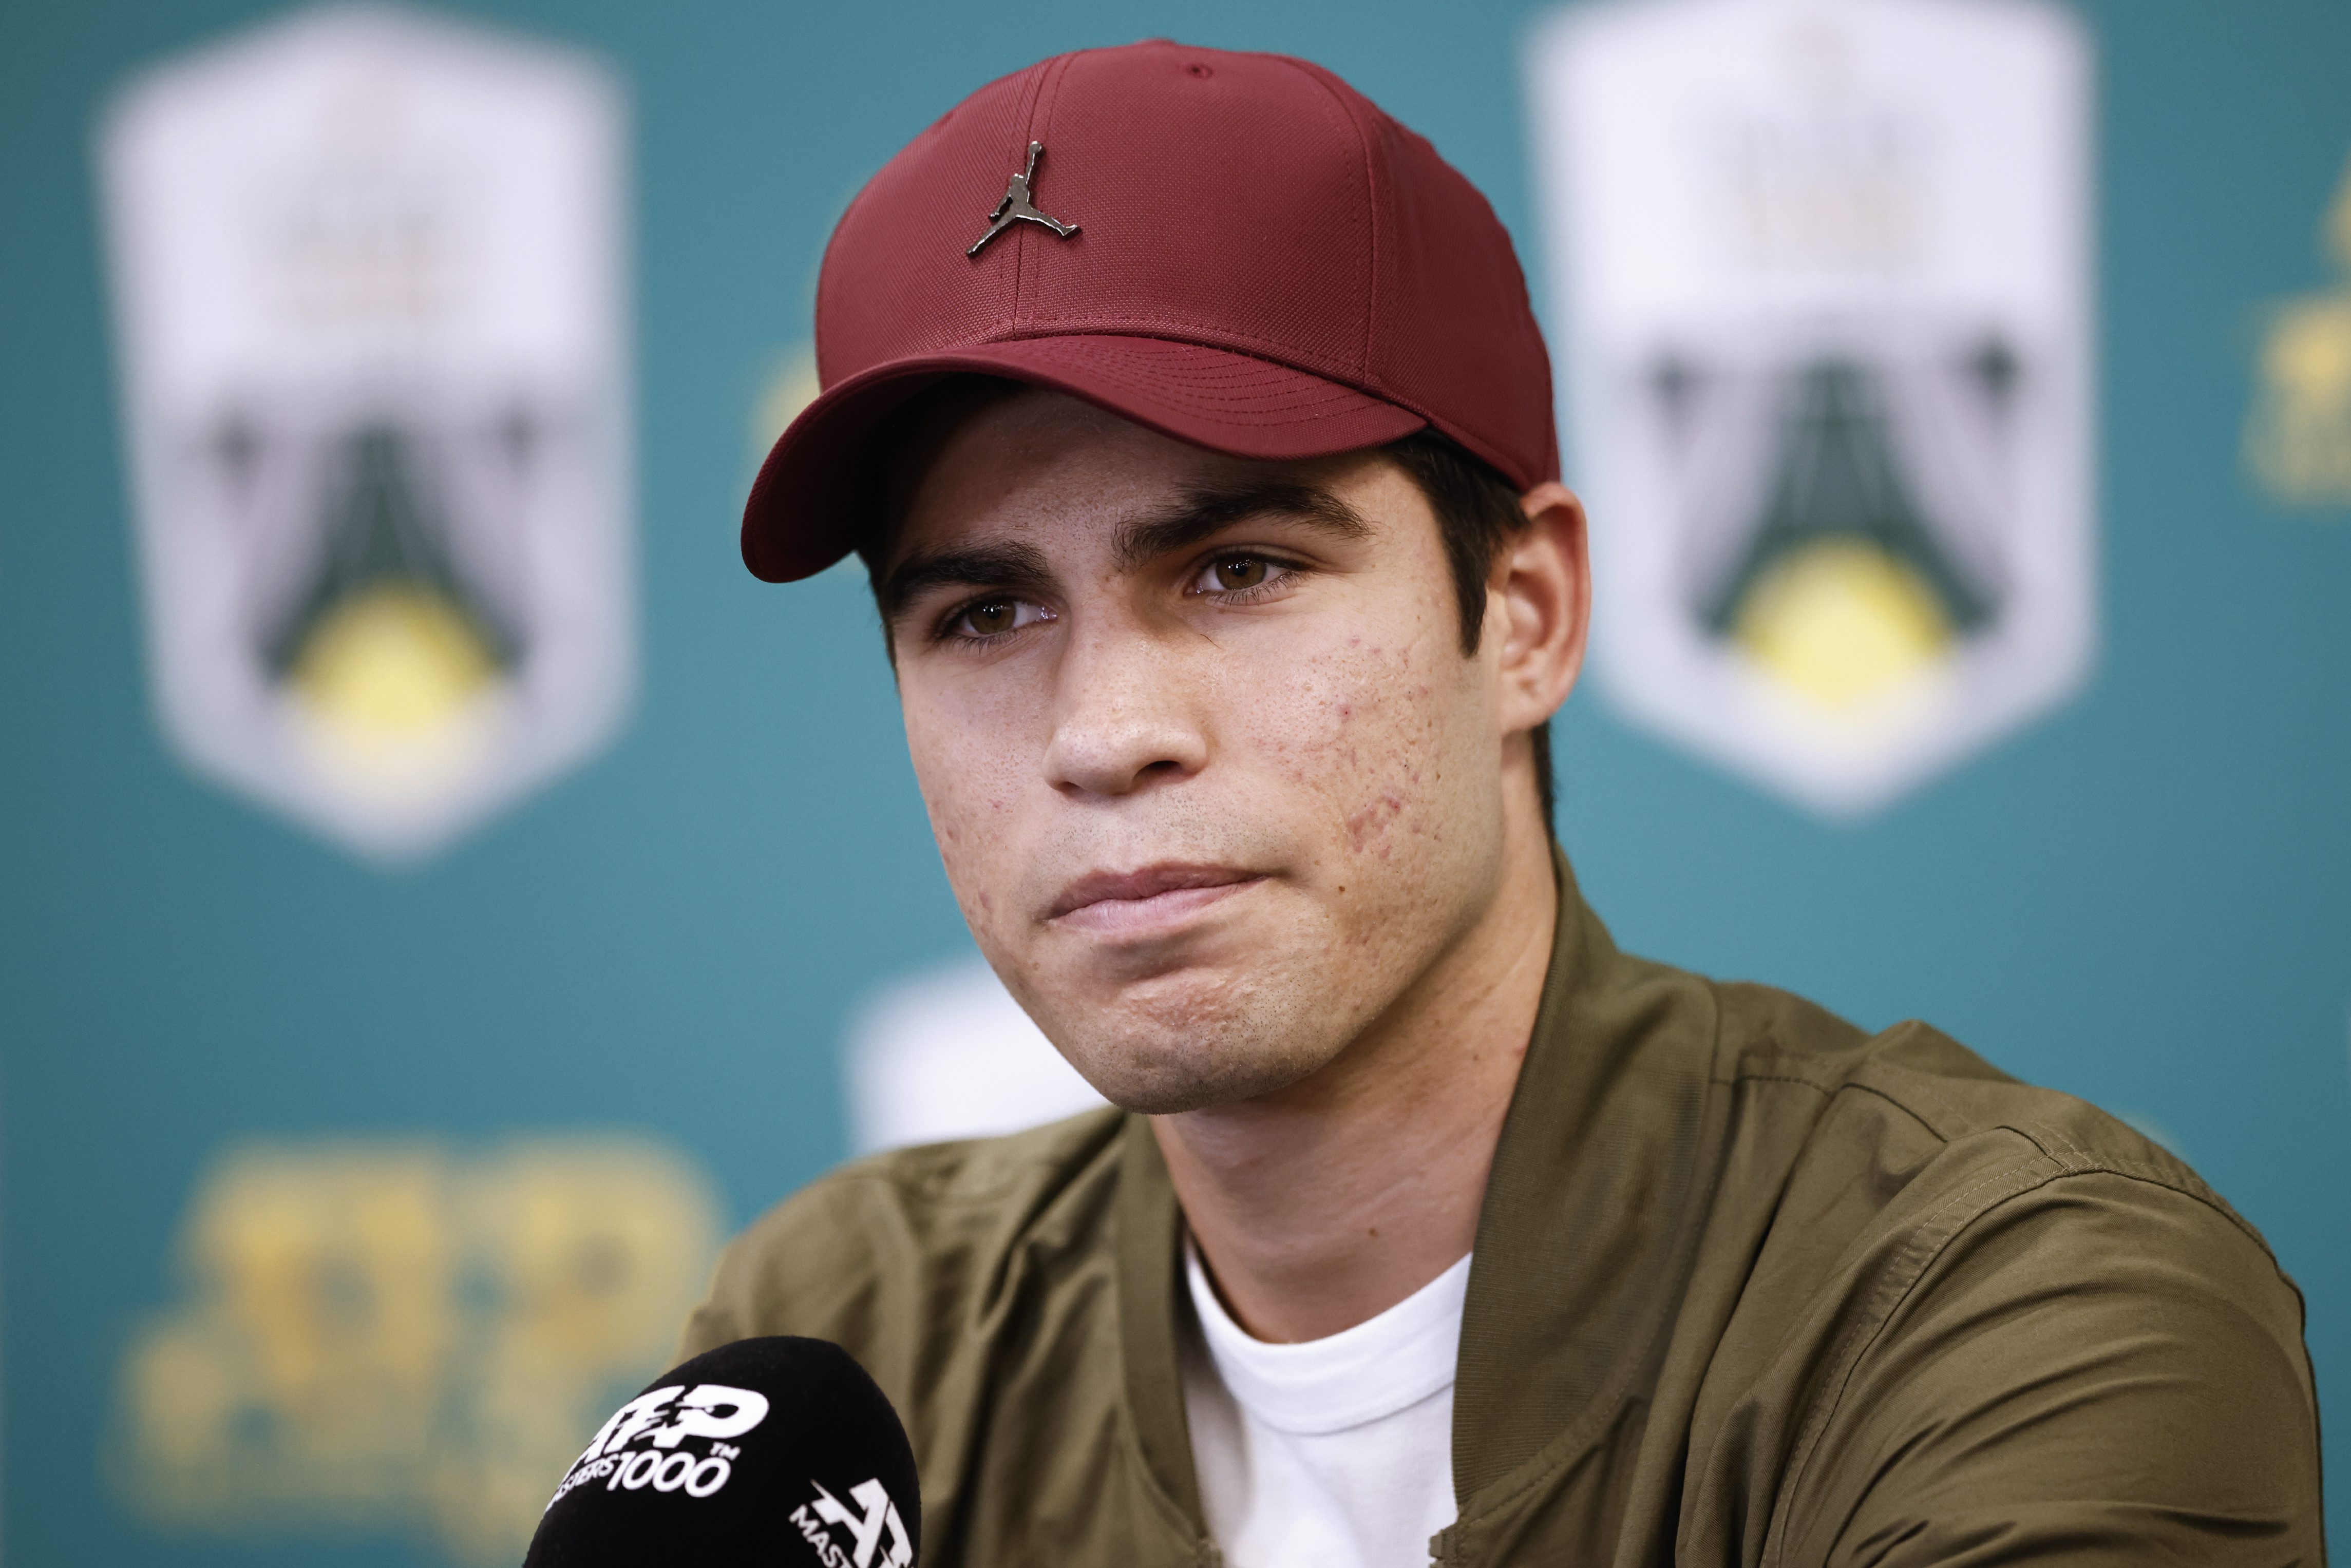 Carlos Alcaraz during a press conference at the Masters 1,000 in Paris